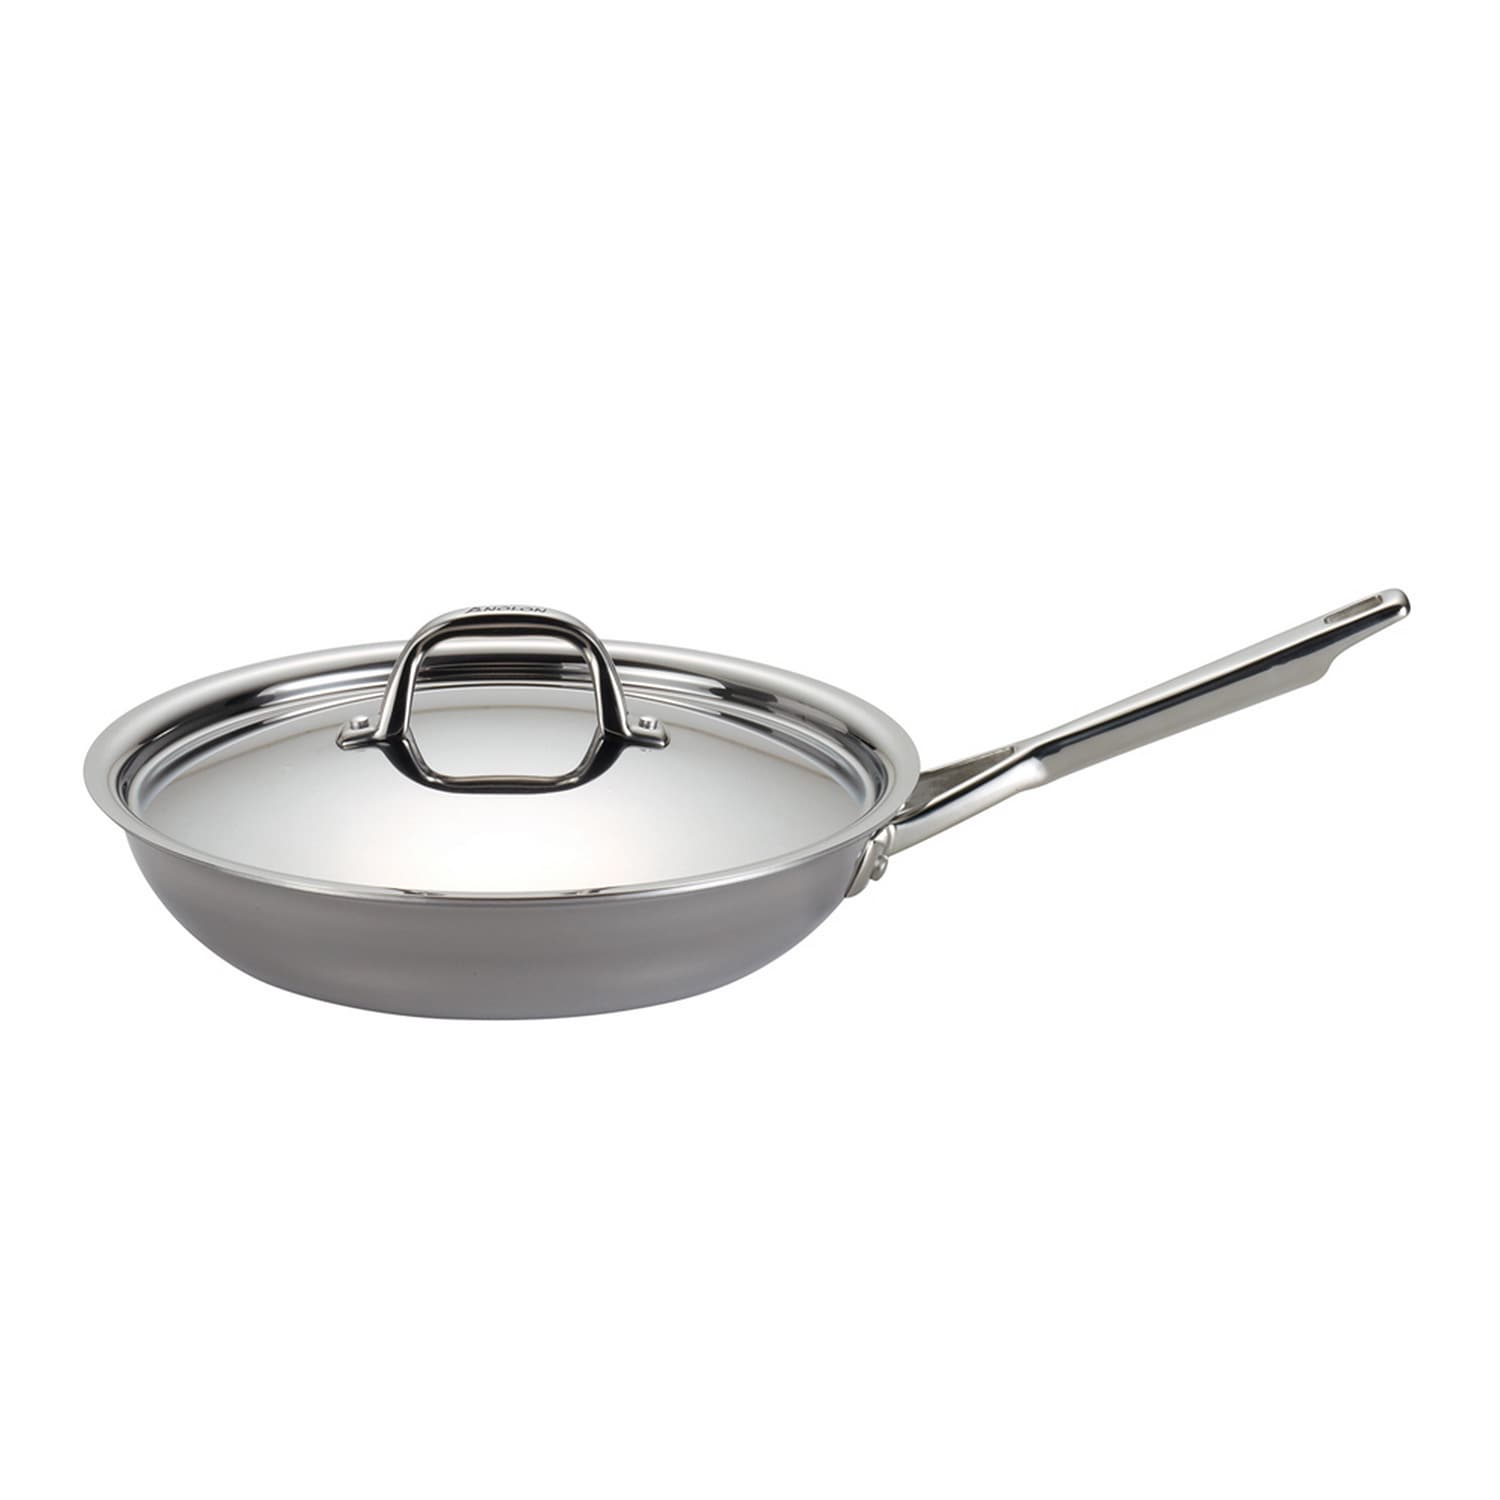 https://ak1.ostkcdn.com/images/products/9206704/Anolon-Tri-ply-Clad-Stainless-Steel-12-3-4-inch-Covered-Skillet-e9c9178a-2f0b-47f4-8d50-1c9d54db6650.jpg